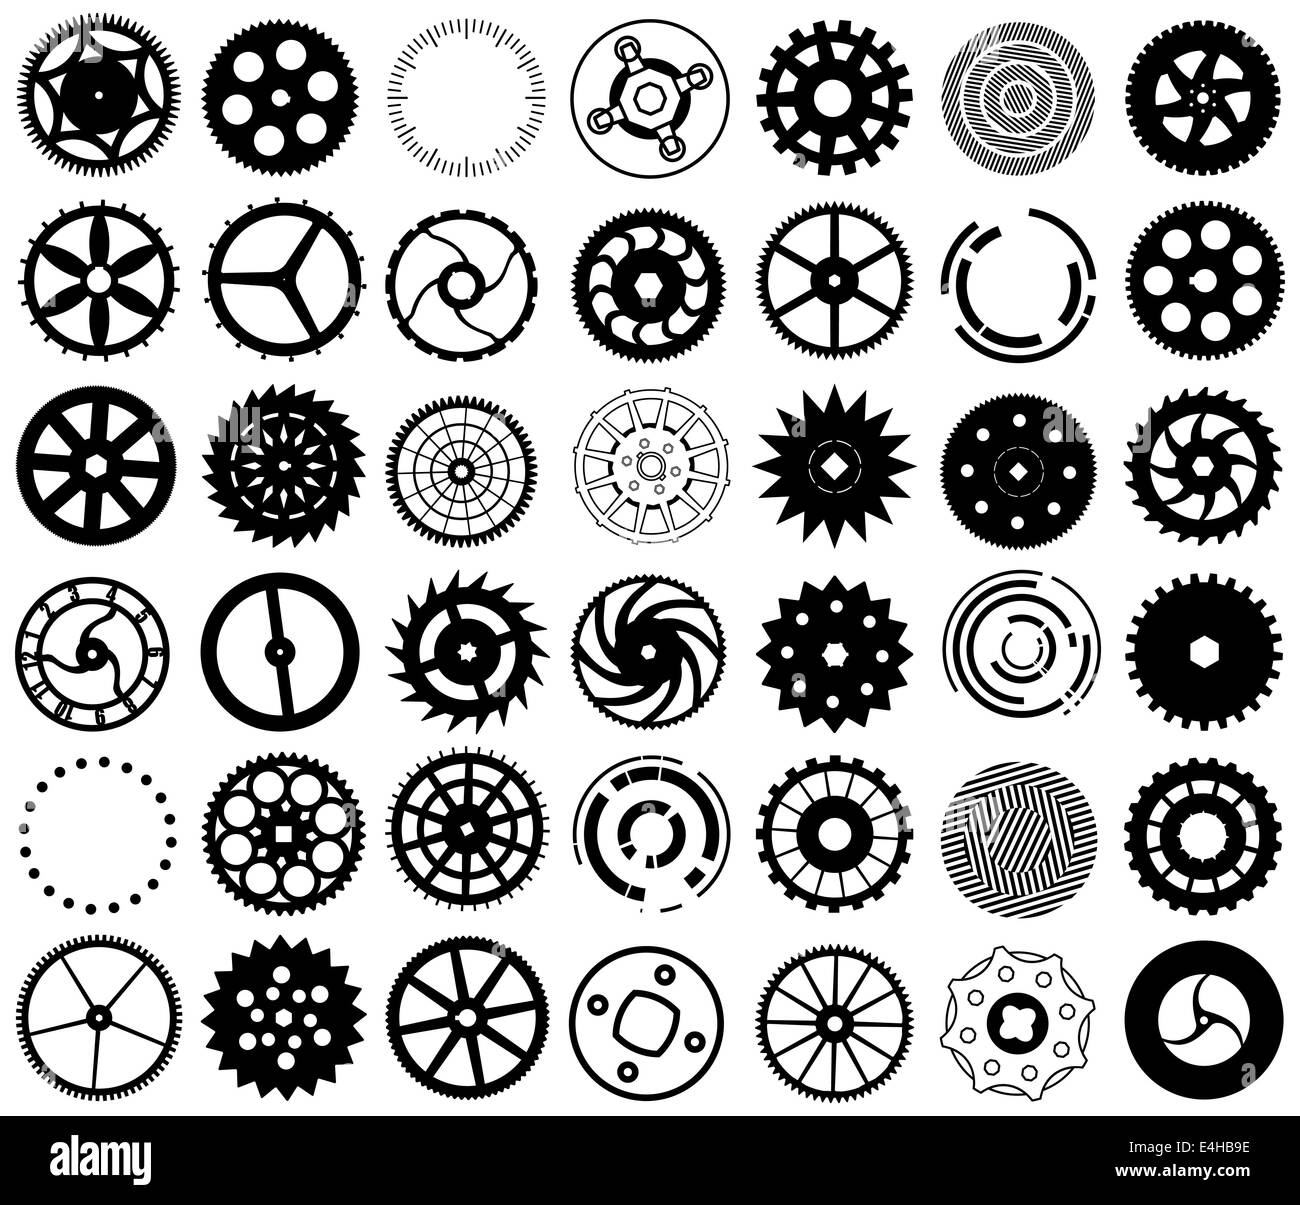 Set of black silhouettes of gears and other round objects Stock Photo